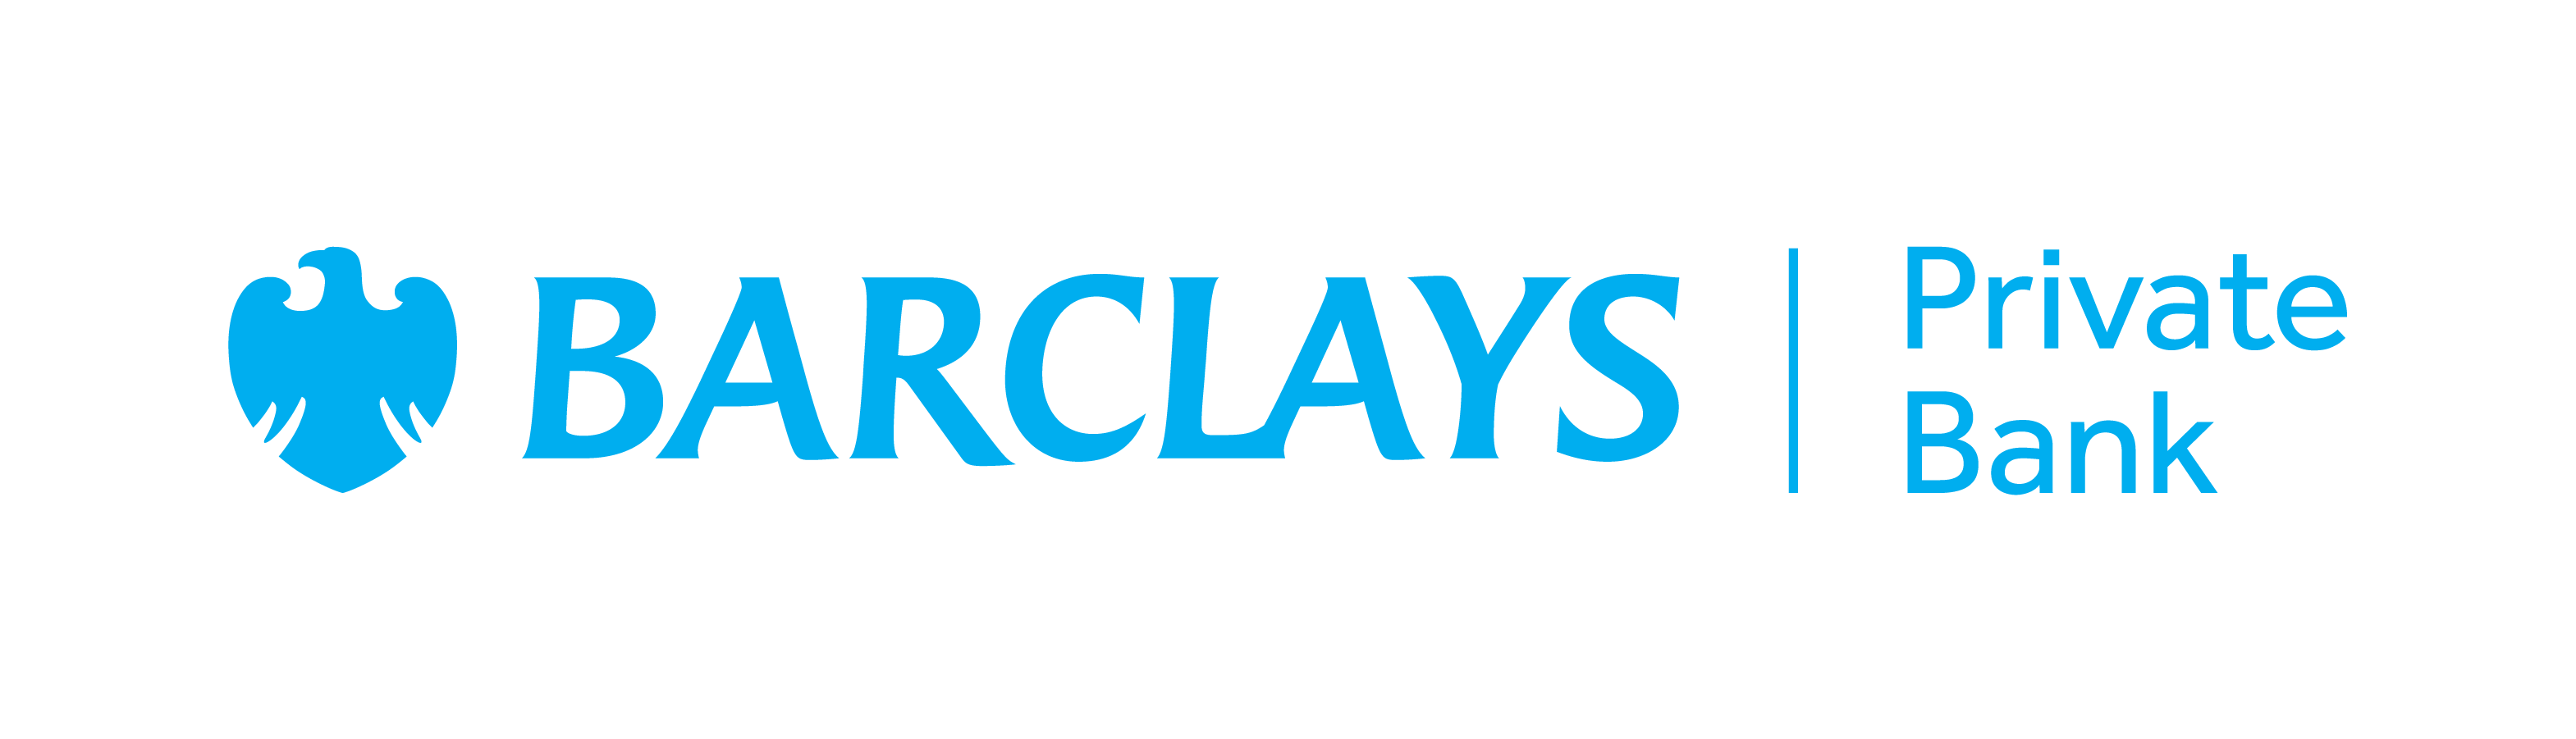 Barclays Private Bank